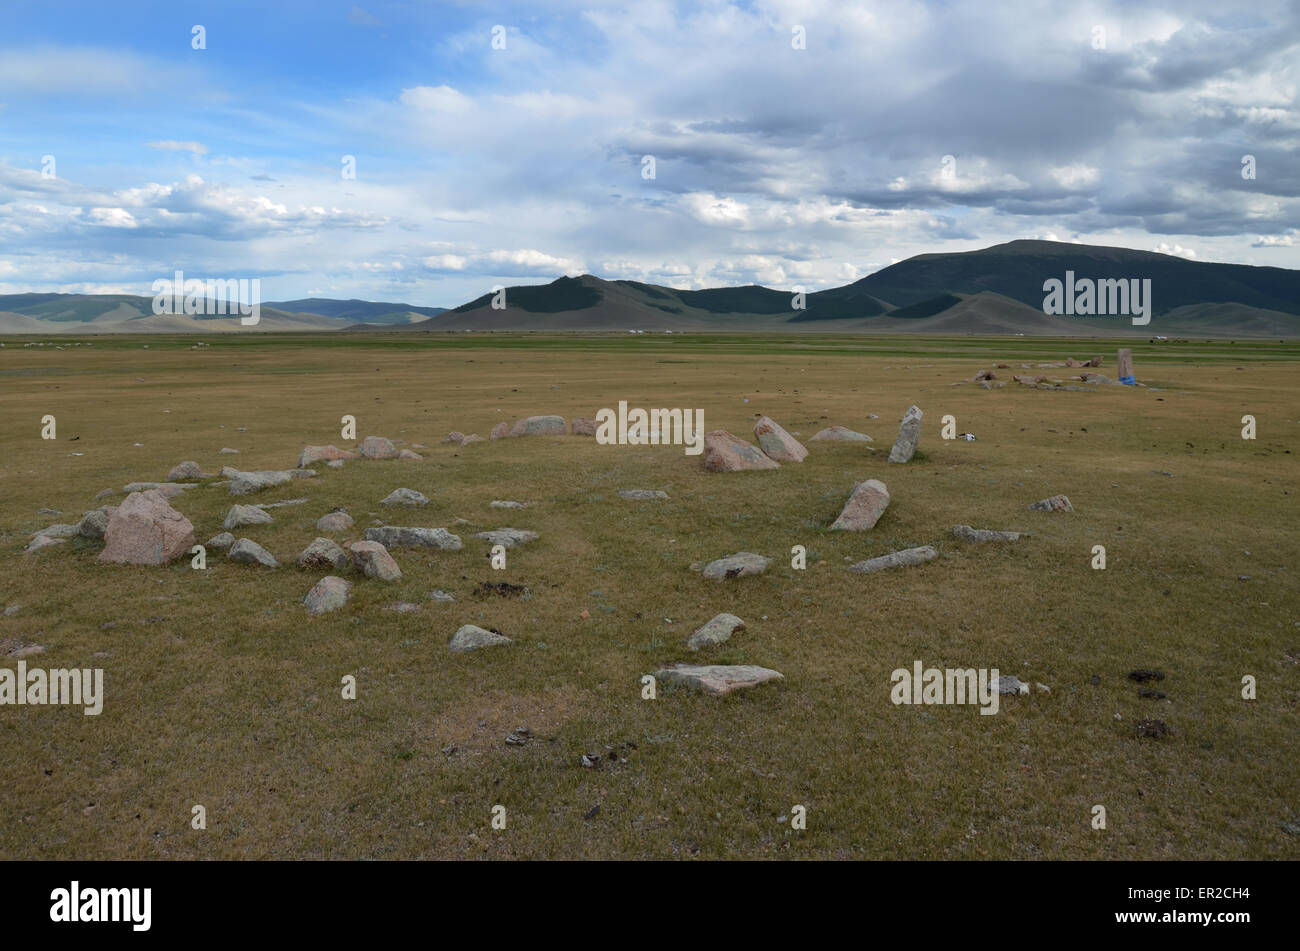 Burial mound in the Arhangay province, Mongolia. Stock Photo